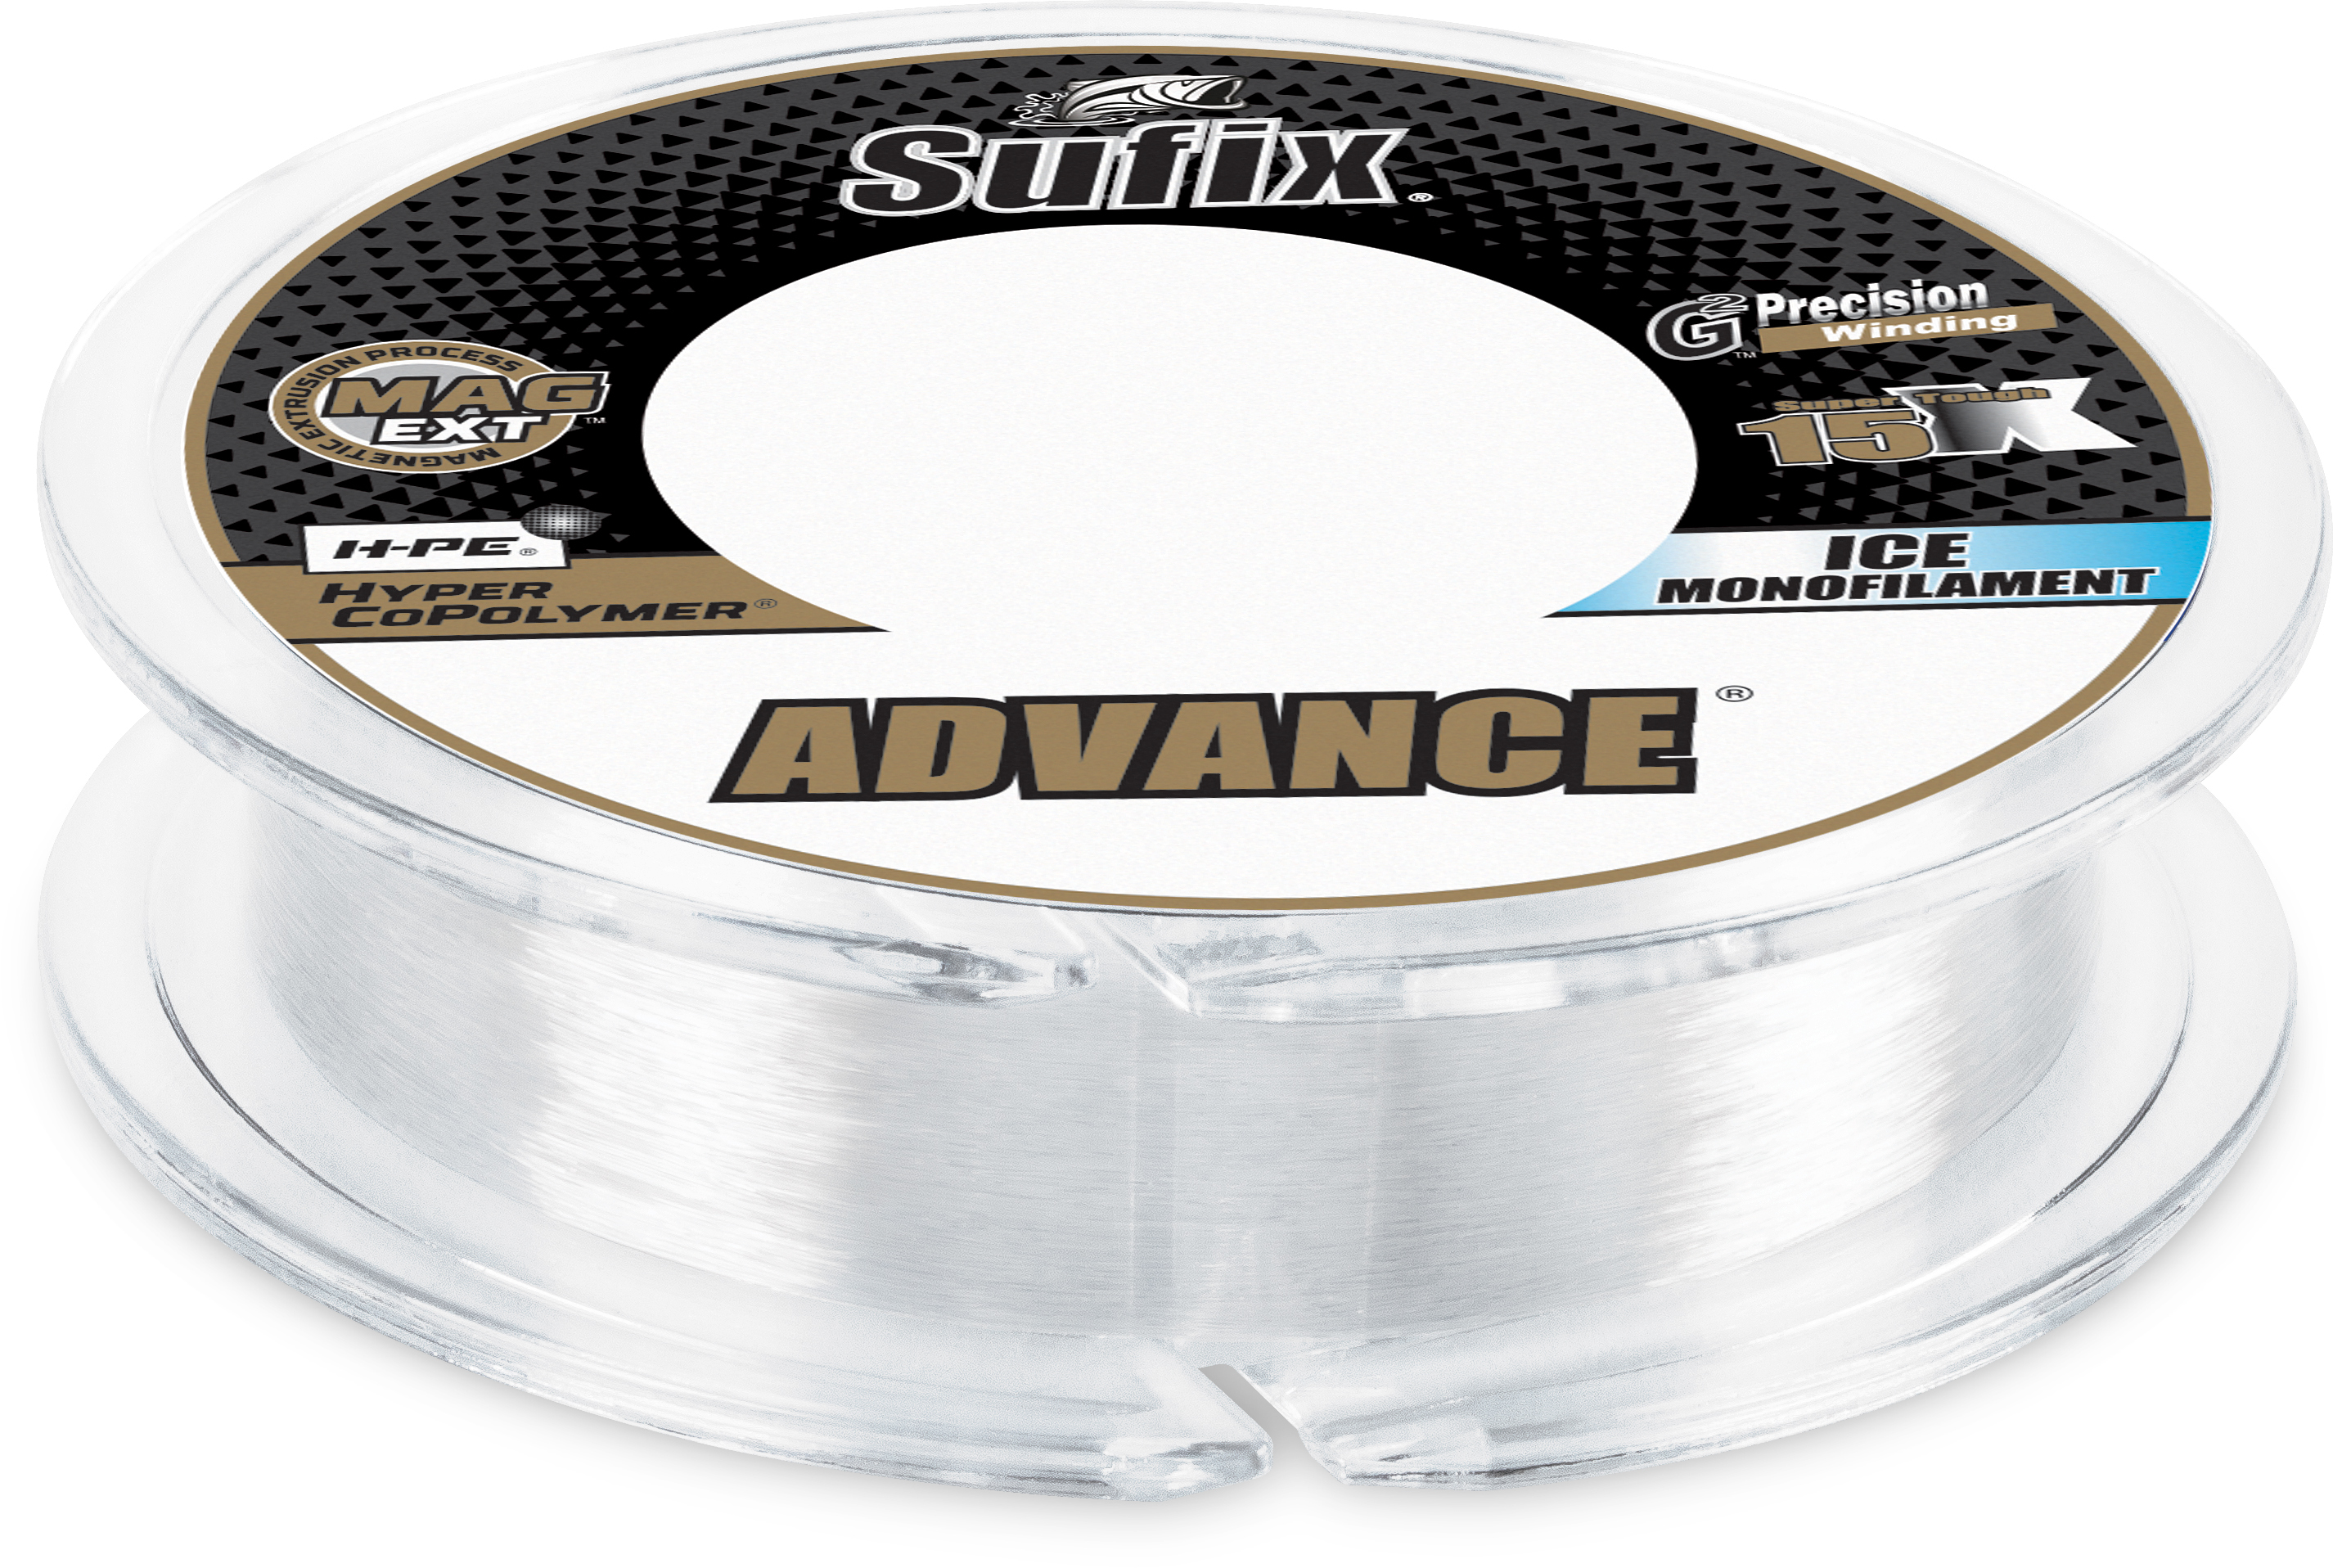 https://op2.0ps.us/original/opplanet-sufix-advance-ice-monofilament-2-lb-100-yd-clear-606-002-main